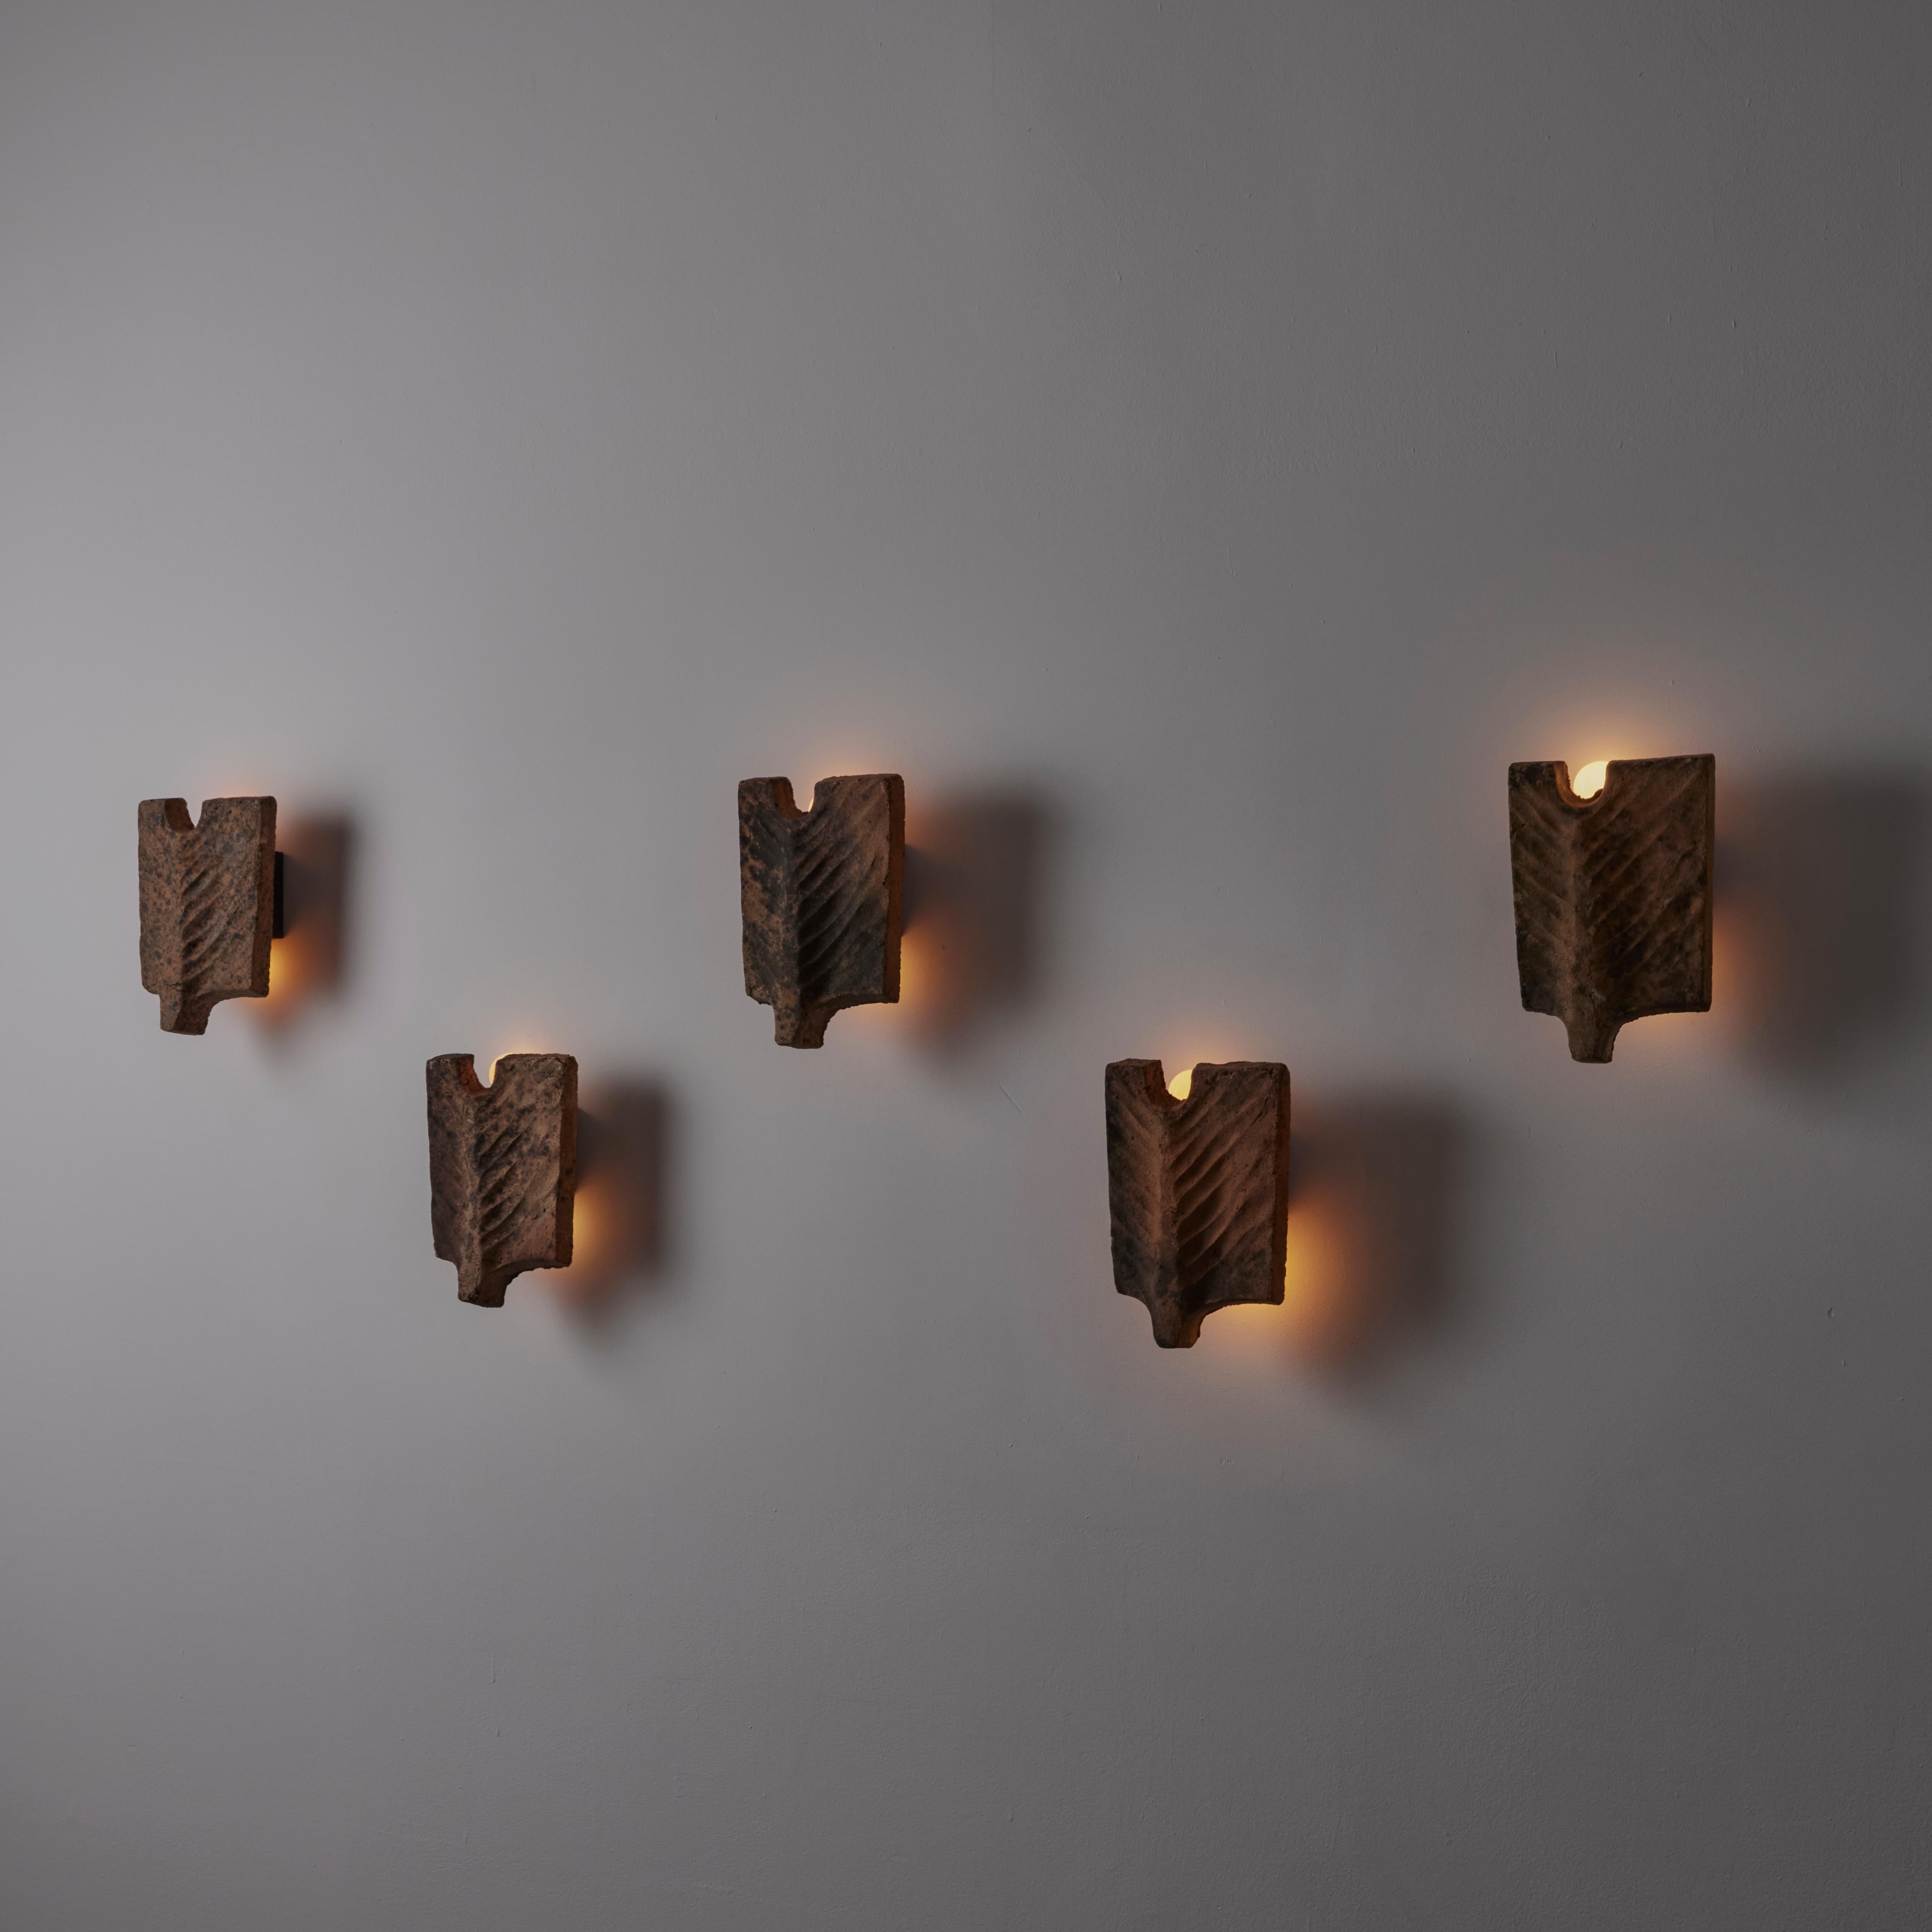 'Palme' sconces by Georges Jouve. Designed and manufactured in France, circa 1950s. Organic and anatomical sandstone forms make up these striking sconces. A steel structure behind the stone holds a double ended socket. Bulbs peak out of the top and